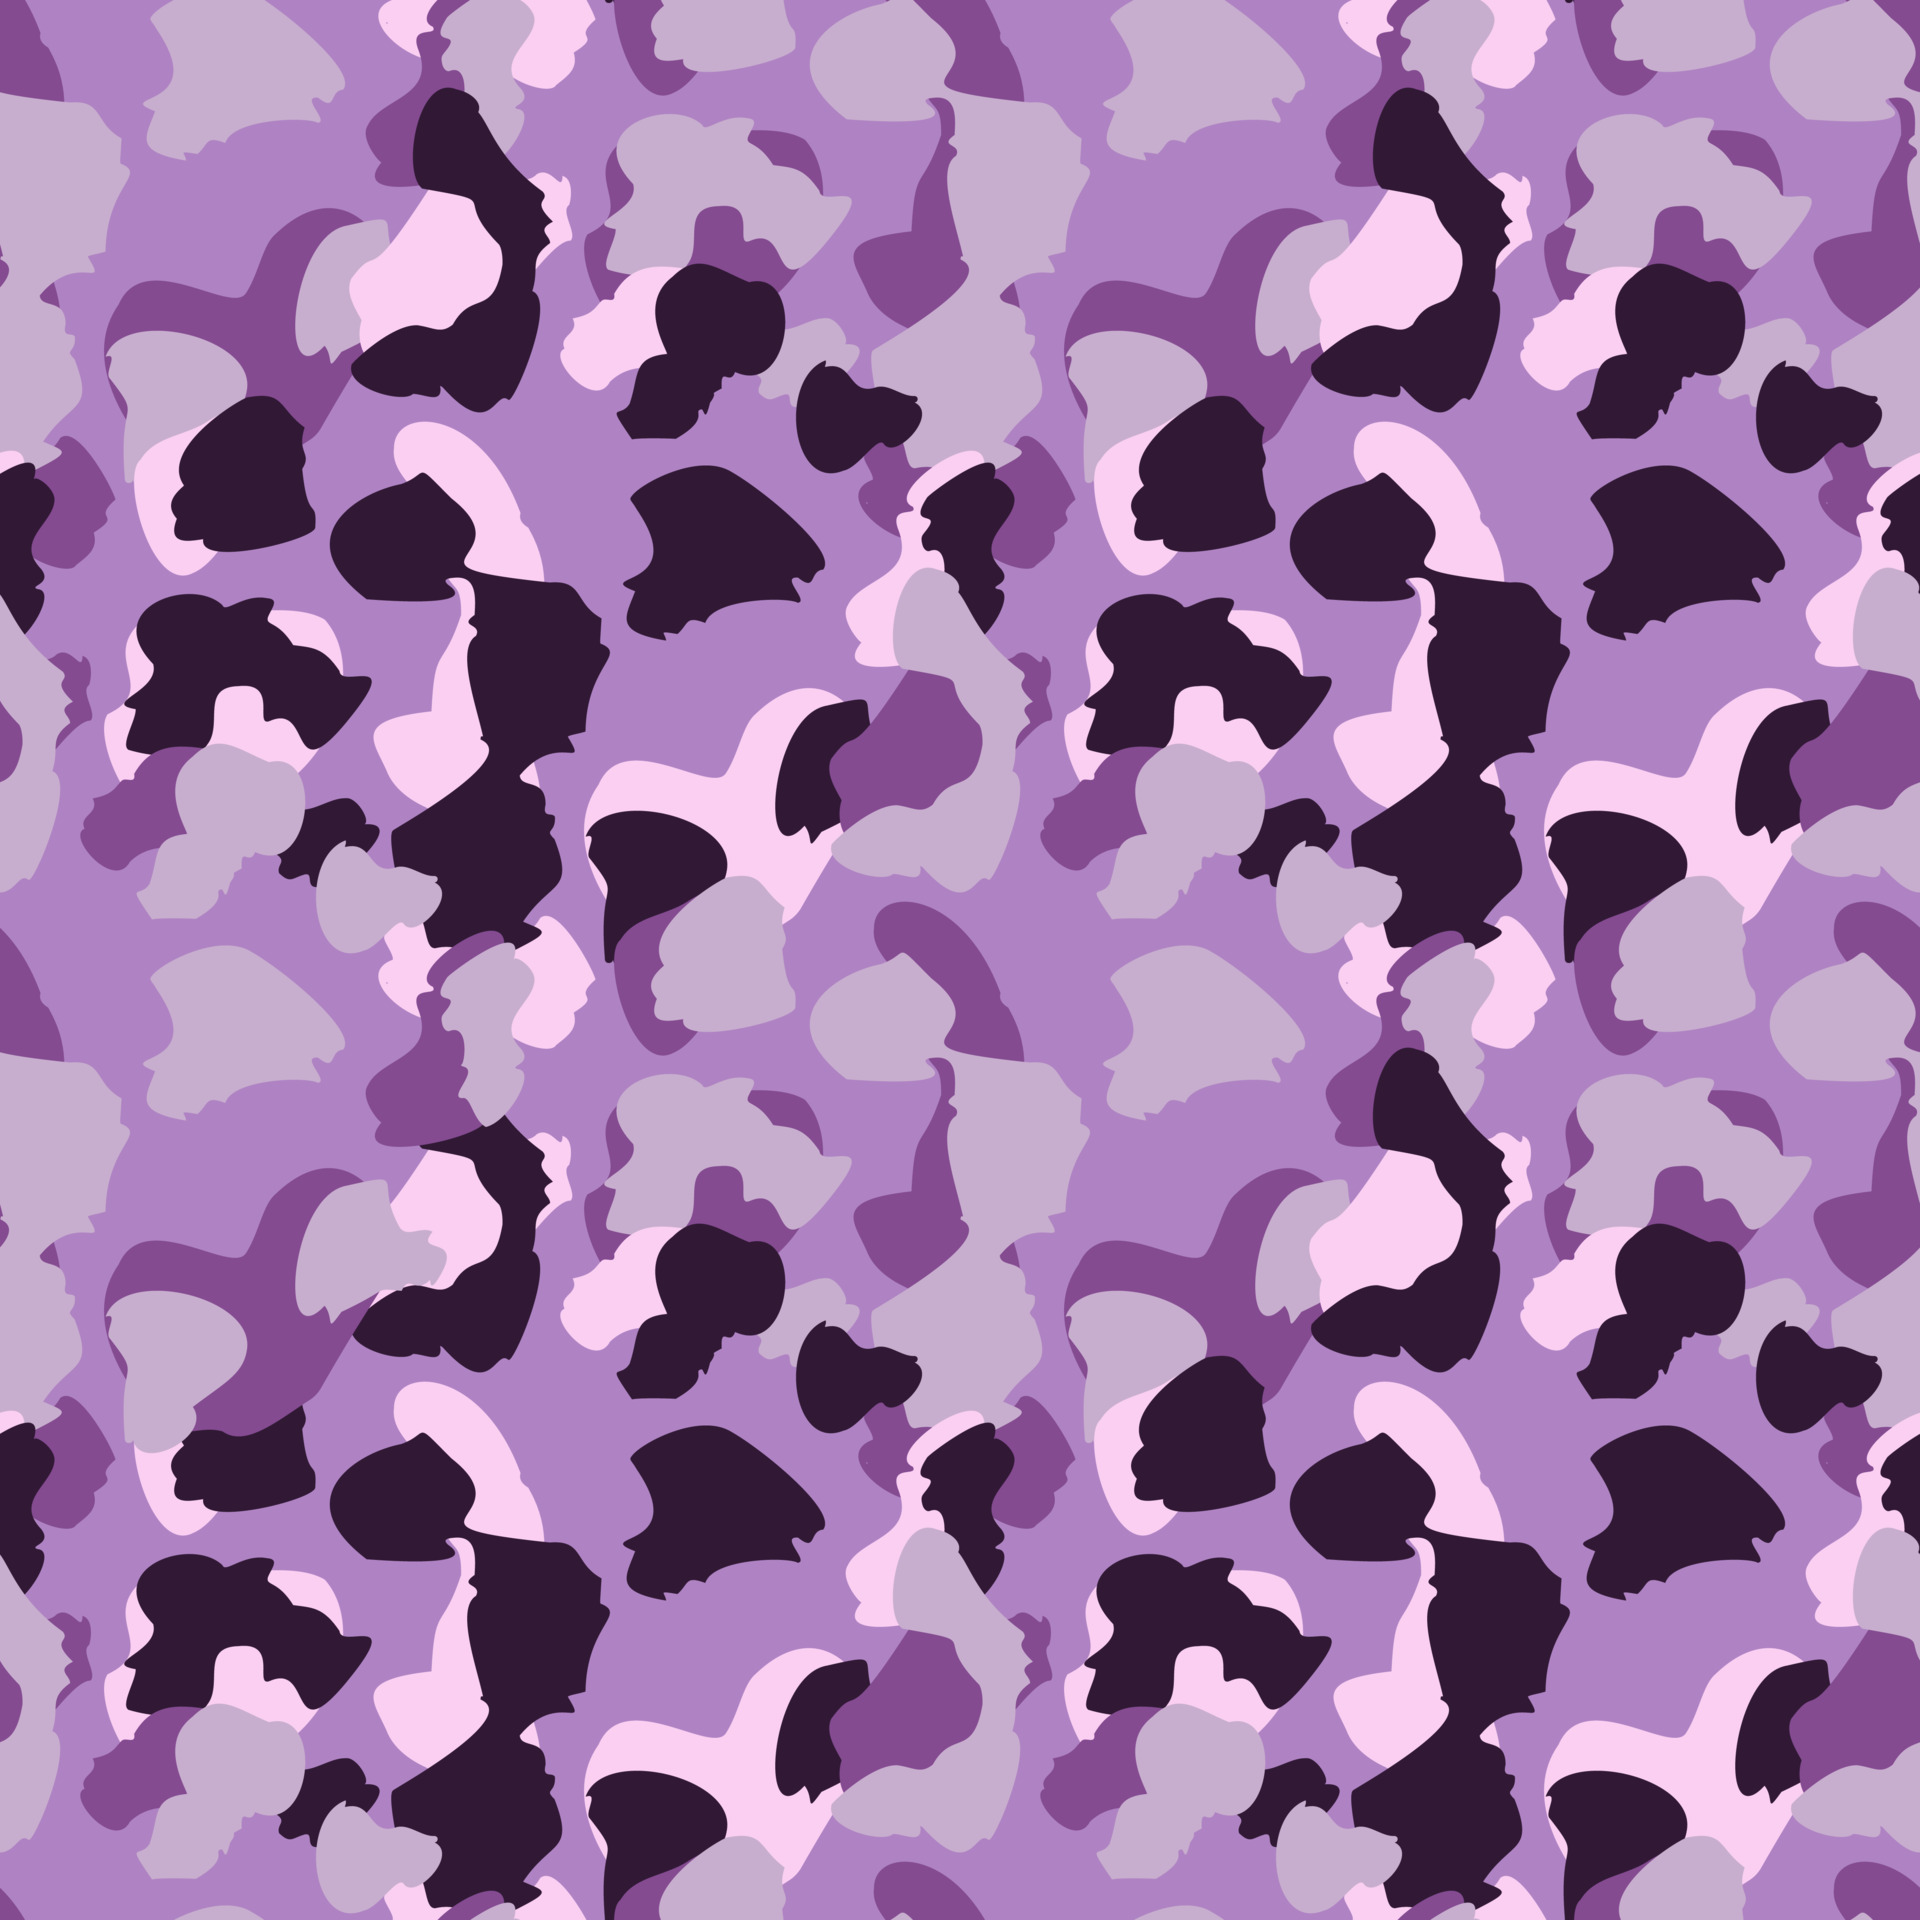 https://static.vecteezy.com/system/resources/previews/006/436/515/original/creative-cheetah-camouflage-seamless-pattern-camo-leopard-elements-background-vector.jpg